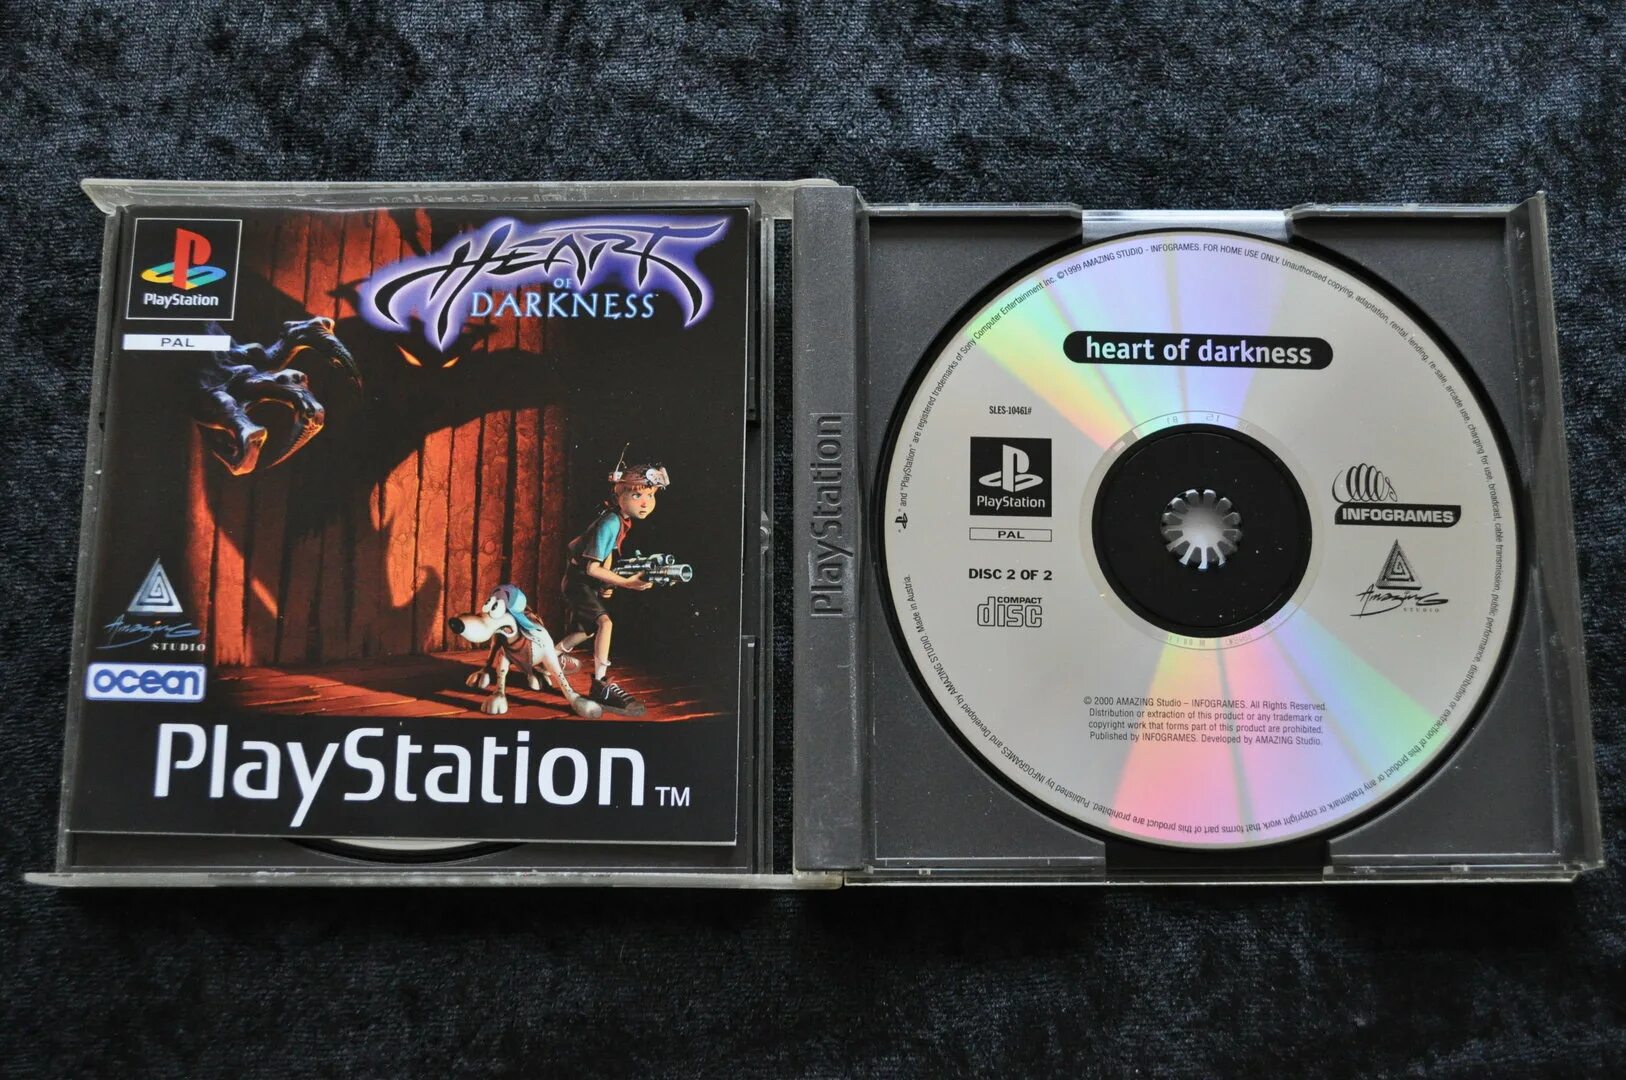 Playstation 1 диски. PLAYSTATION 1 Disc. Ps1 Rhapsody диск. PLAYSTATION 1 игра Darkness. Heart of Darkness ps1 обложка.